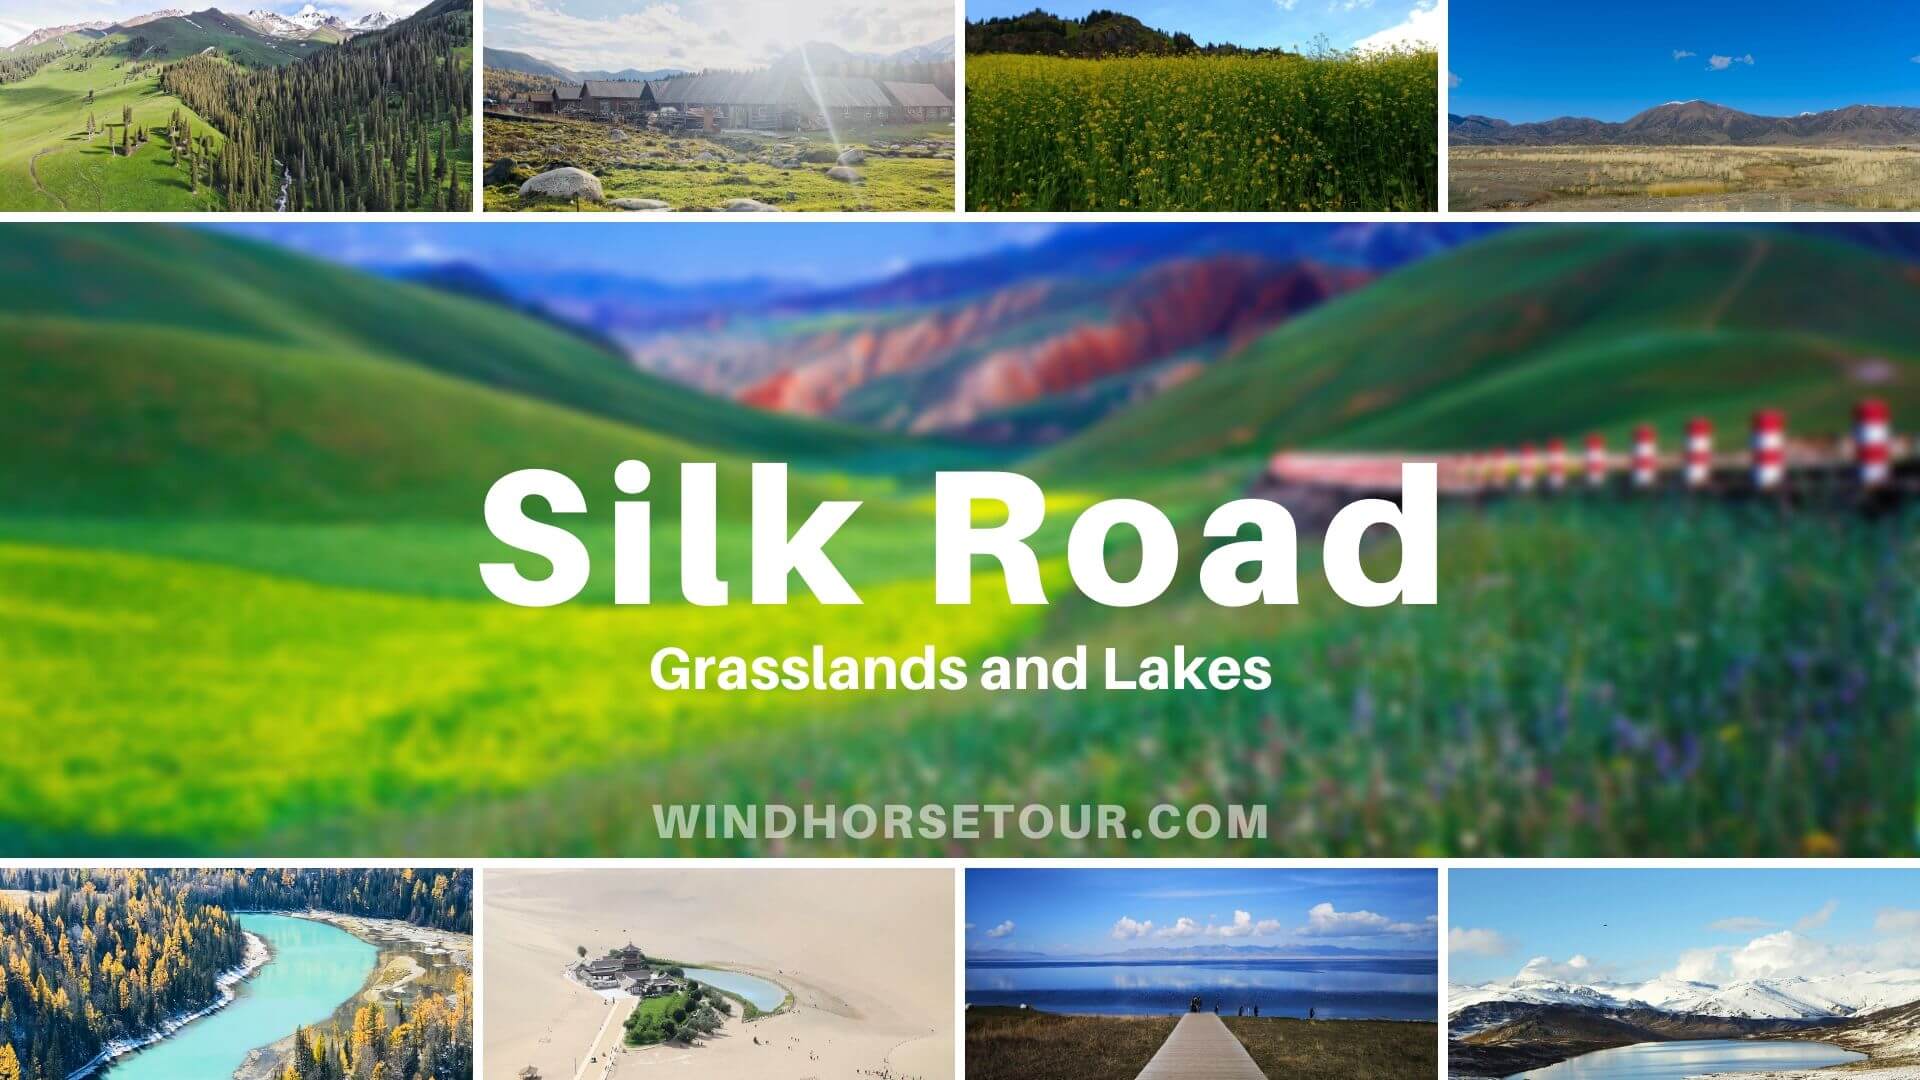 Silk Road Grasslands and Lakes